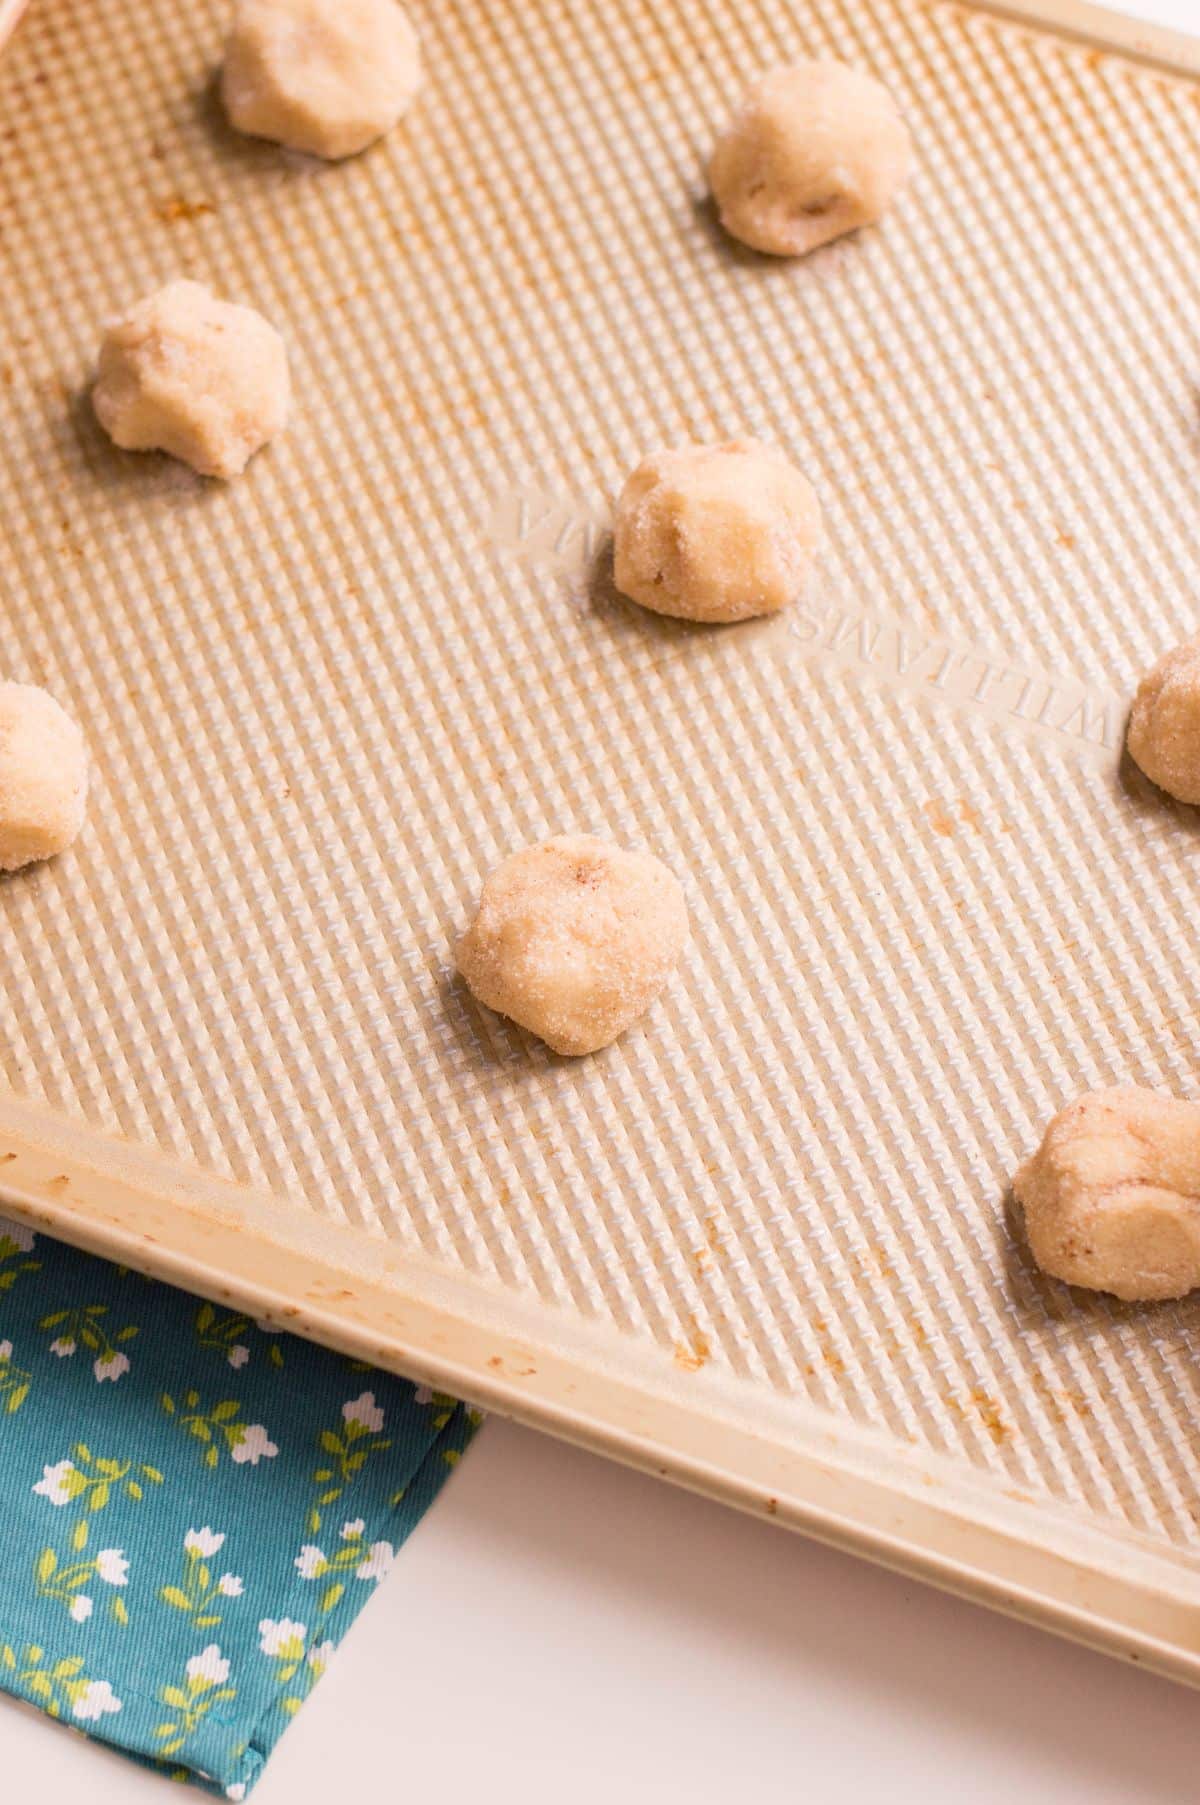 mounds of Cookie dough on the baking sheet.